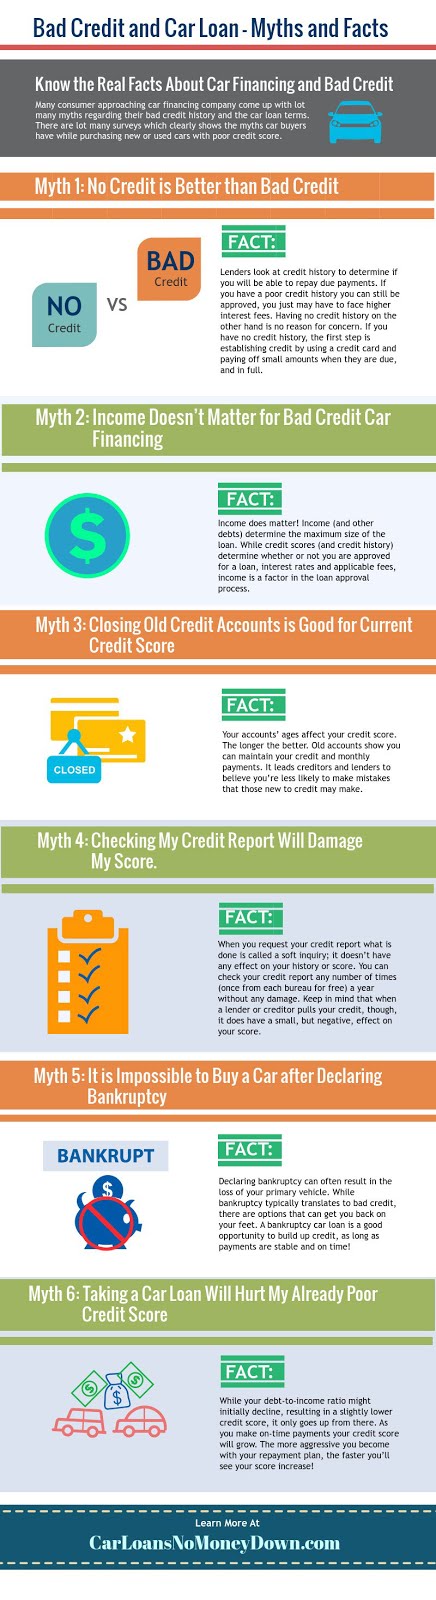 Myths About Bad Credit and Car Loans